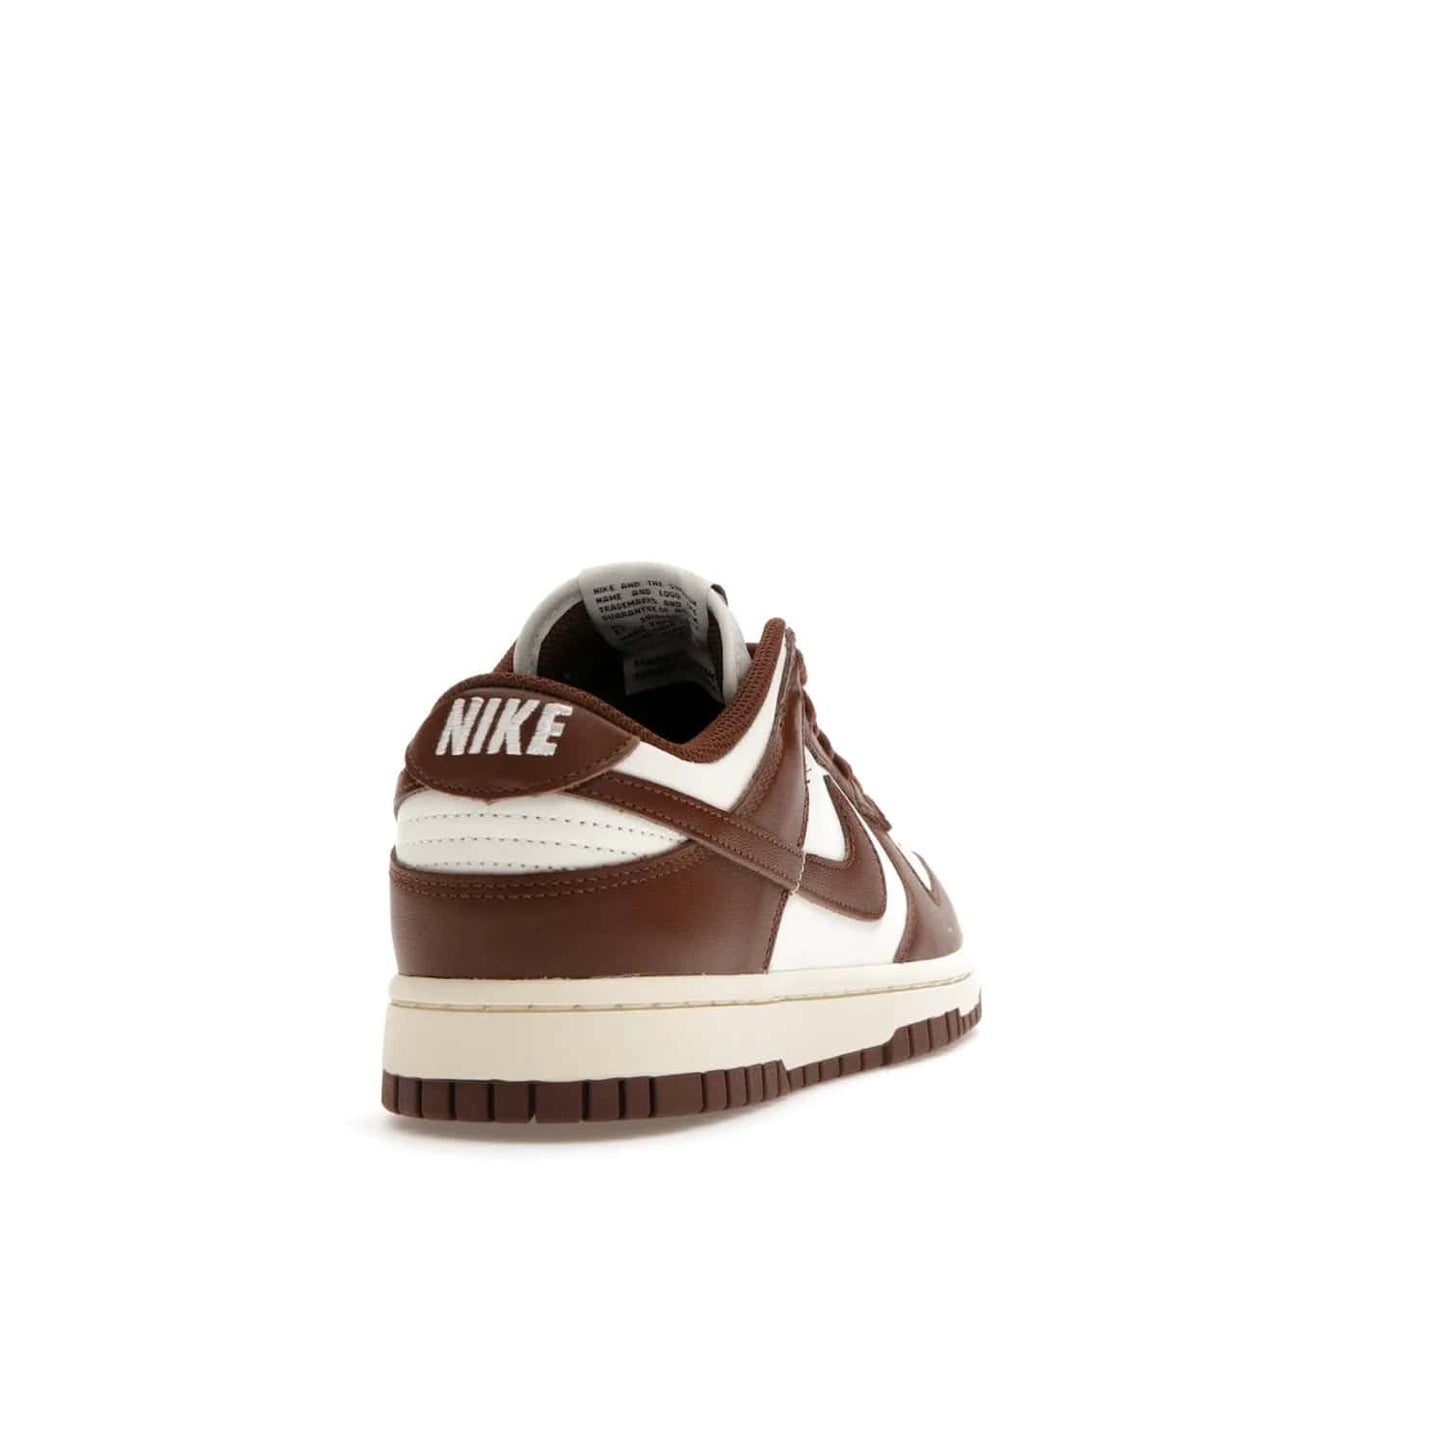 Nike Dunk Low Cacao Wow (Women's) - Image 30 - Only at www.BallersClubKickz.com - Revised
Get the Nike Dunk Low Cacao Wow and make a statement! Plush leather and a cool Cacao Wow finish bring together a unique mix of comfort and fashion that will turn heads. Boosted with a Coconut Milk hue. Shop today.